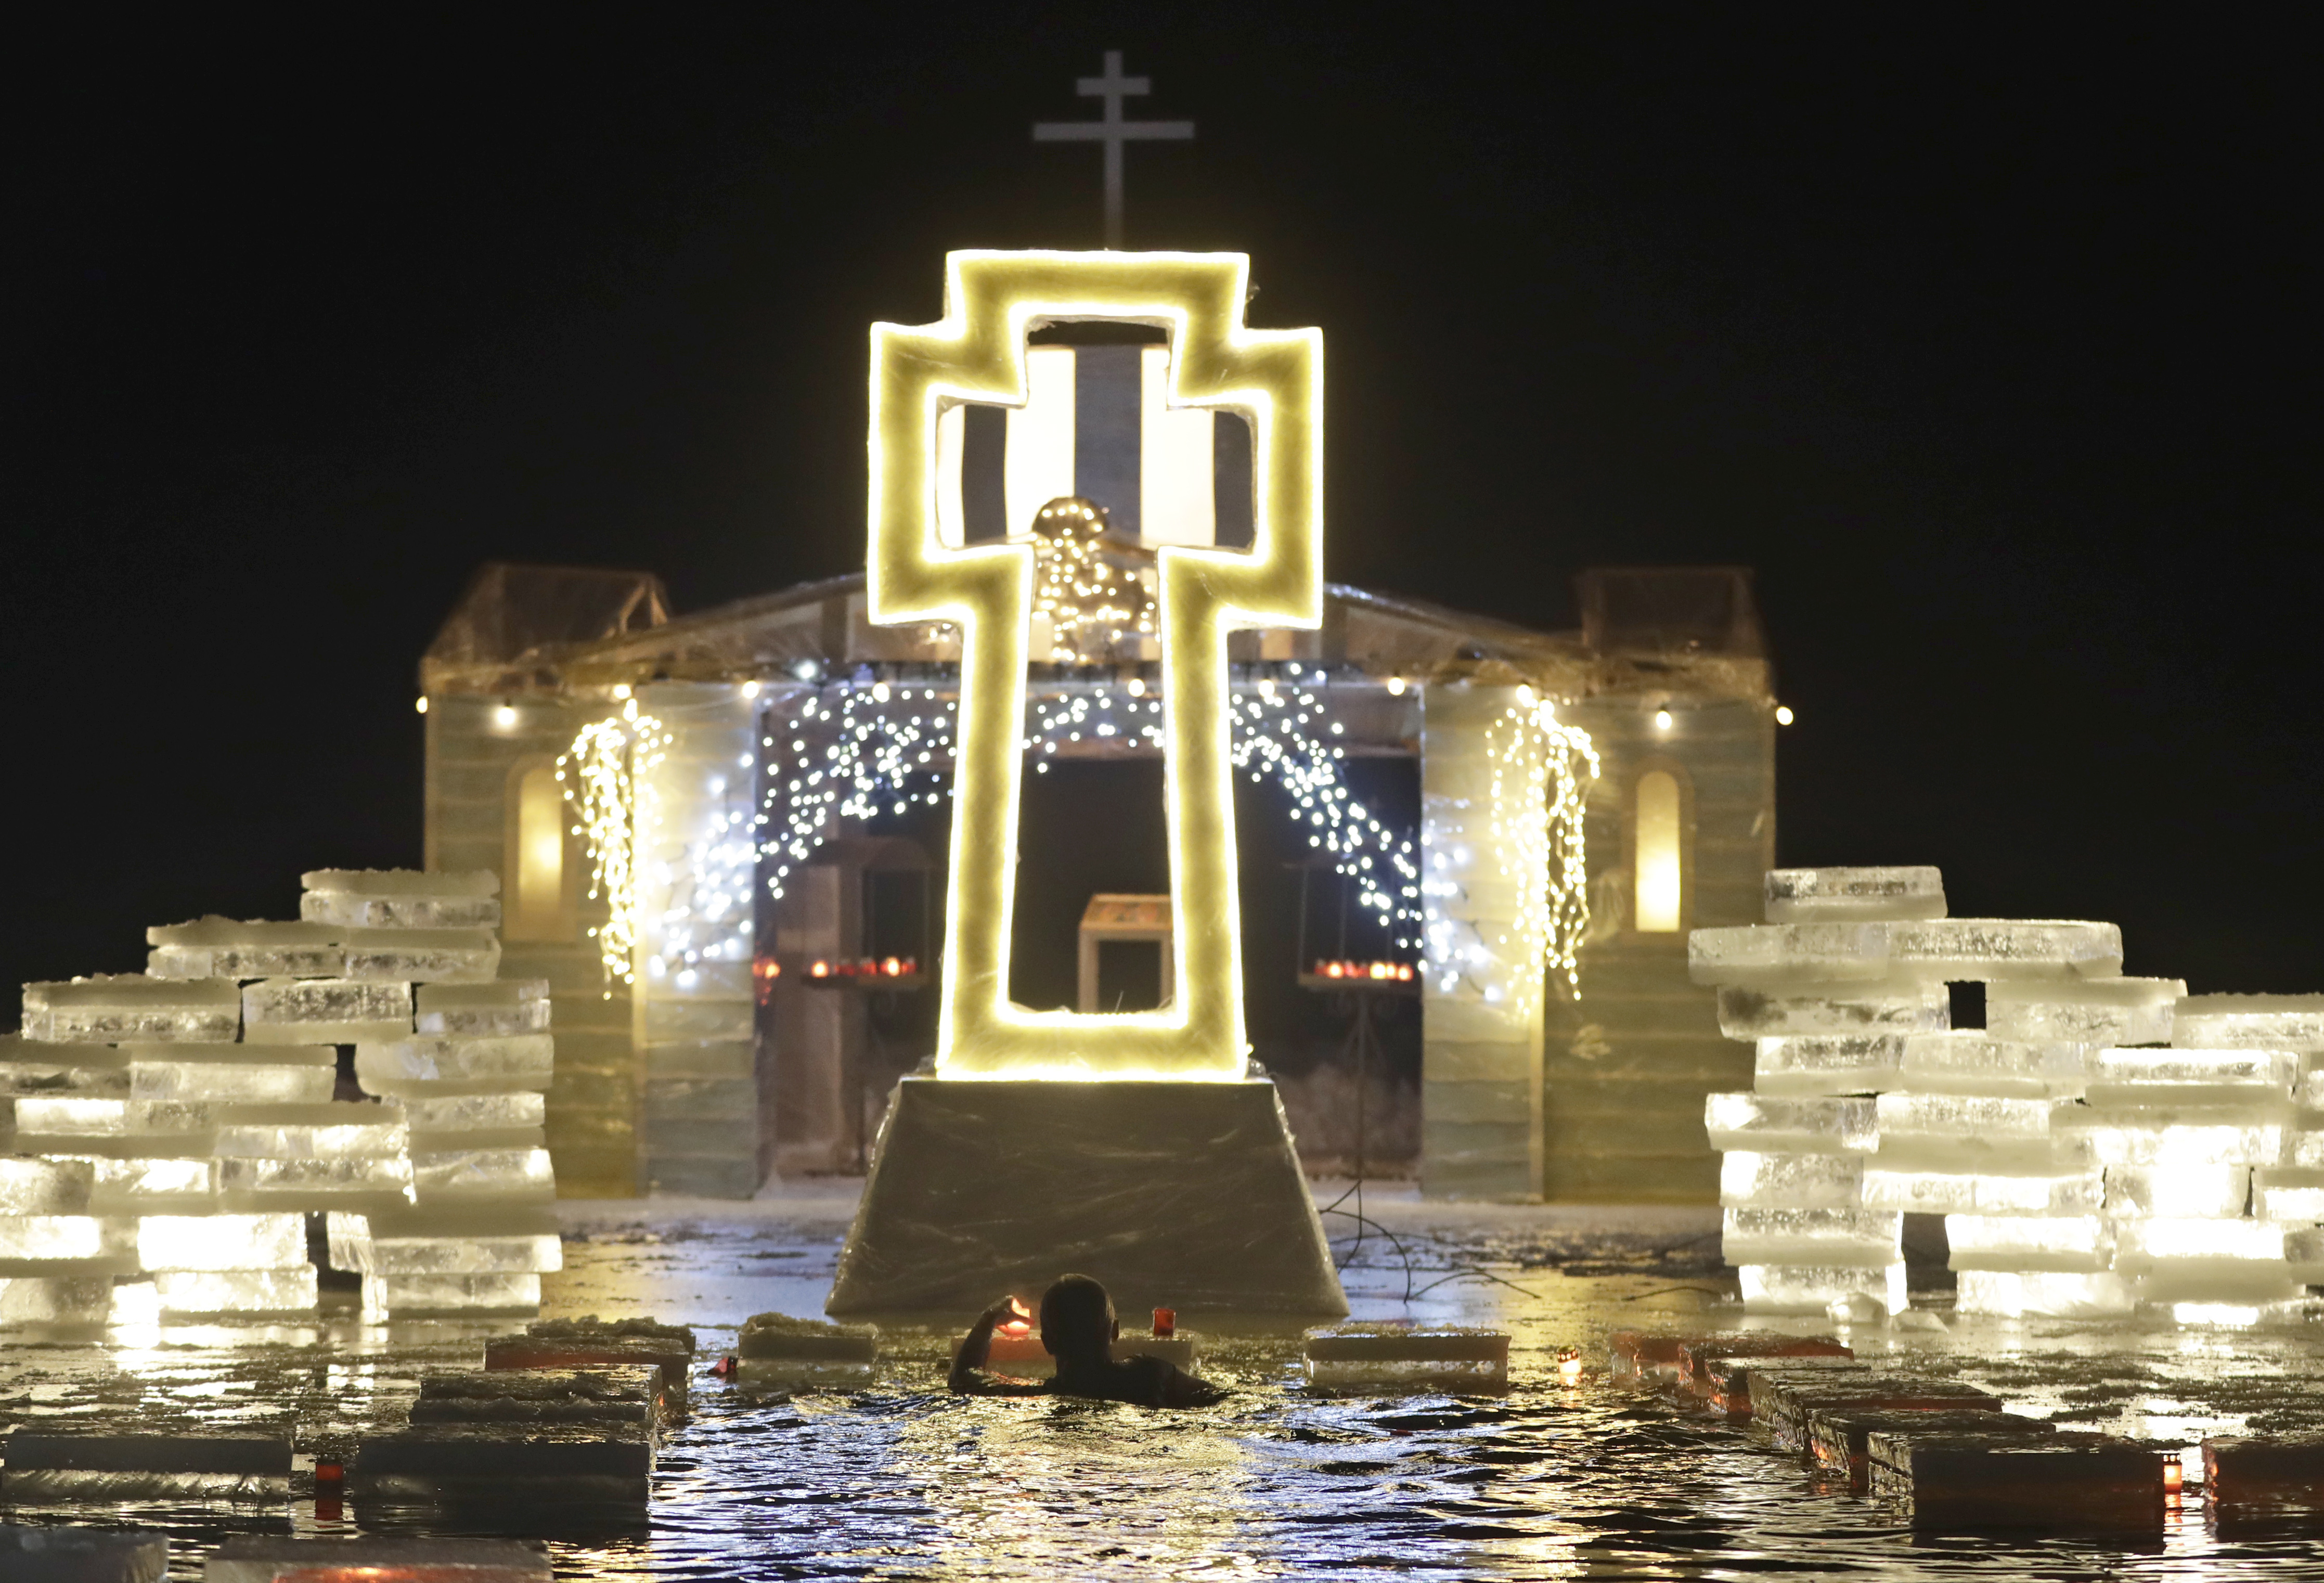 A man puts a candle while bathing in the ice cold water after plunging into it during Orthodox Epiphany celebrations at a lake in the village of Lysaya Gora, north of capital Minsk, Belarus, early Friday, Jan. 19, 2018. Thousands of Belarusian Orthodox Church followers plunged into icy rivers and ponds across the country to mark Epiphany, cleansing themselves with water deemed holy for the day. (AP Photo/Sergei Grits)